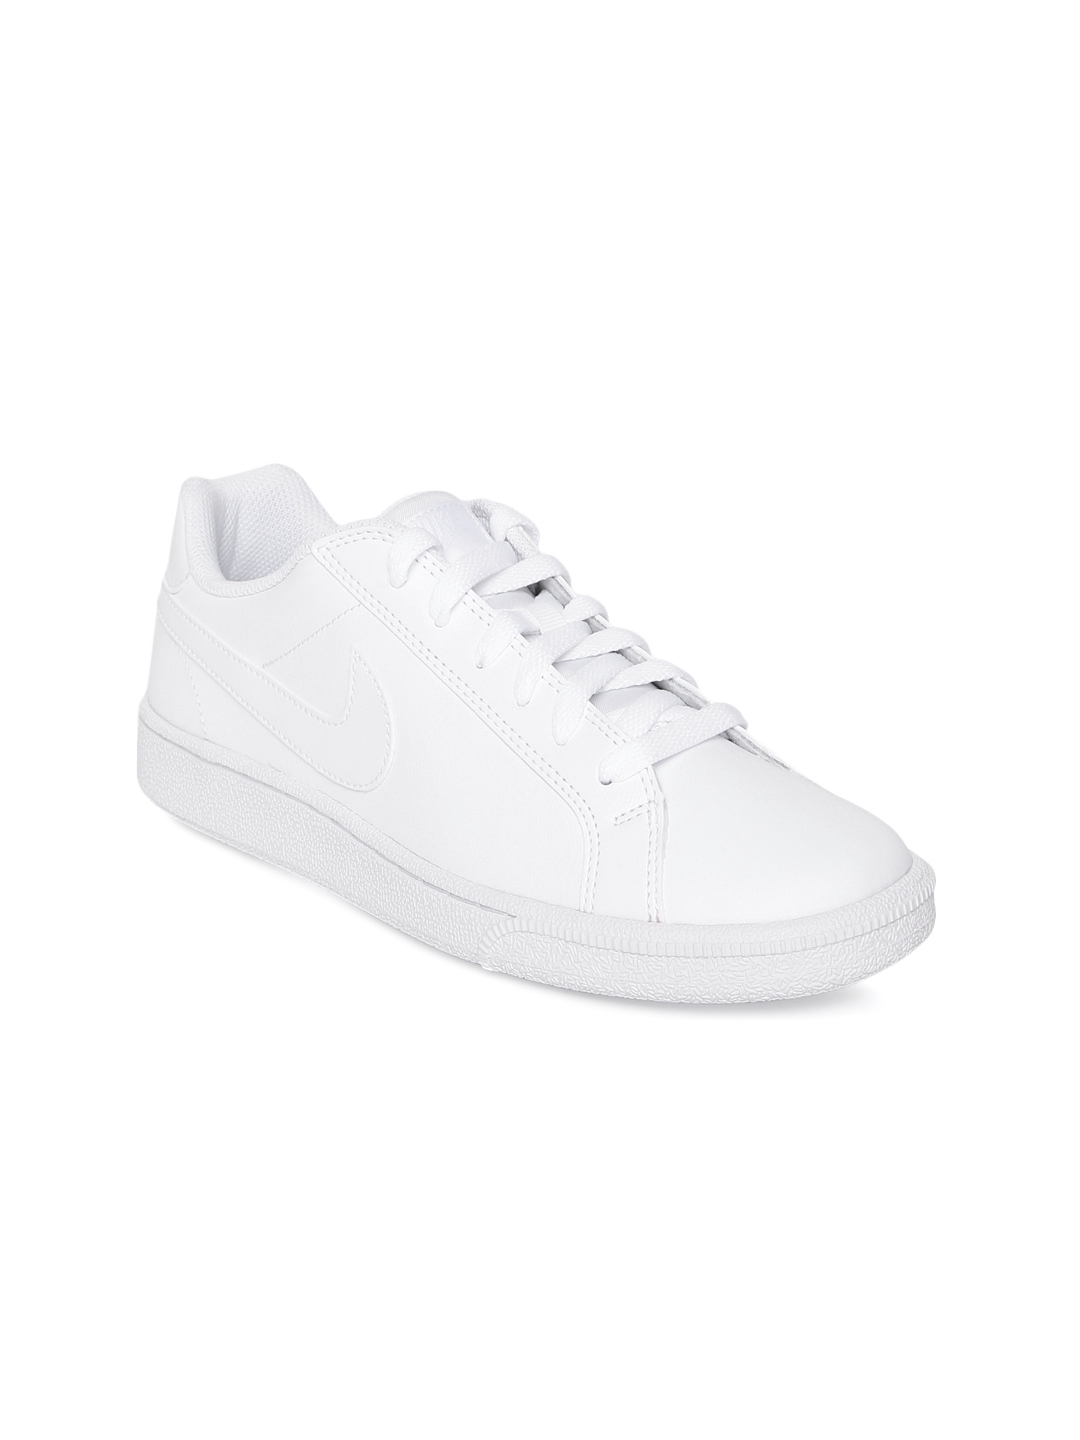 Buy Nike Women White COURT MAJESTIC Leather Sneakers - Casual Shoes for ...